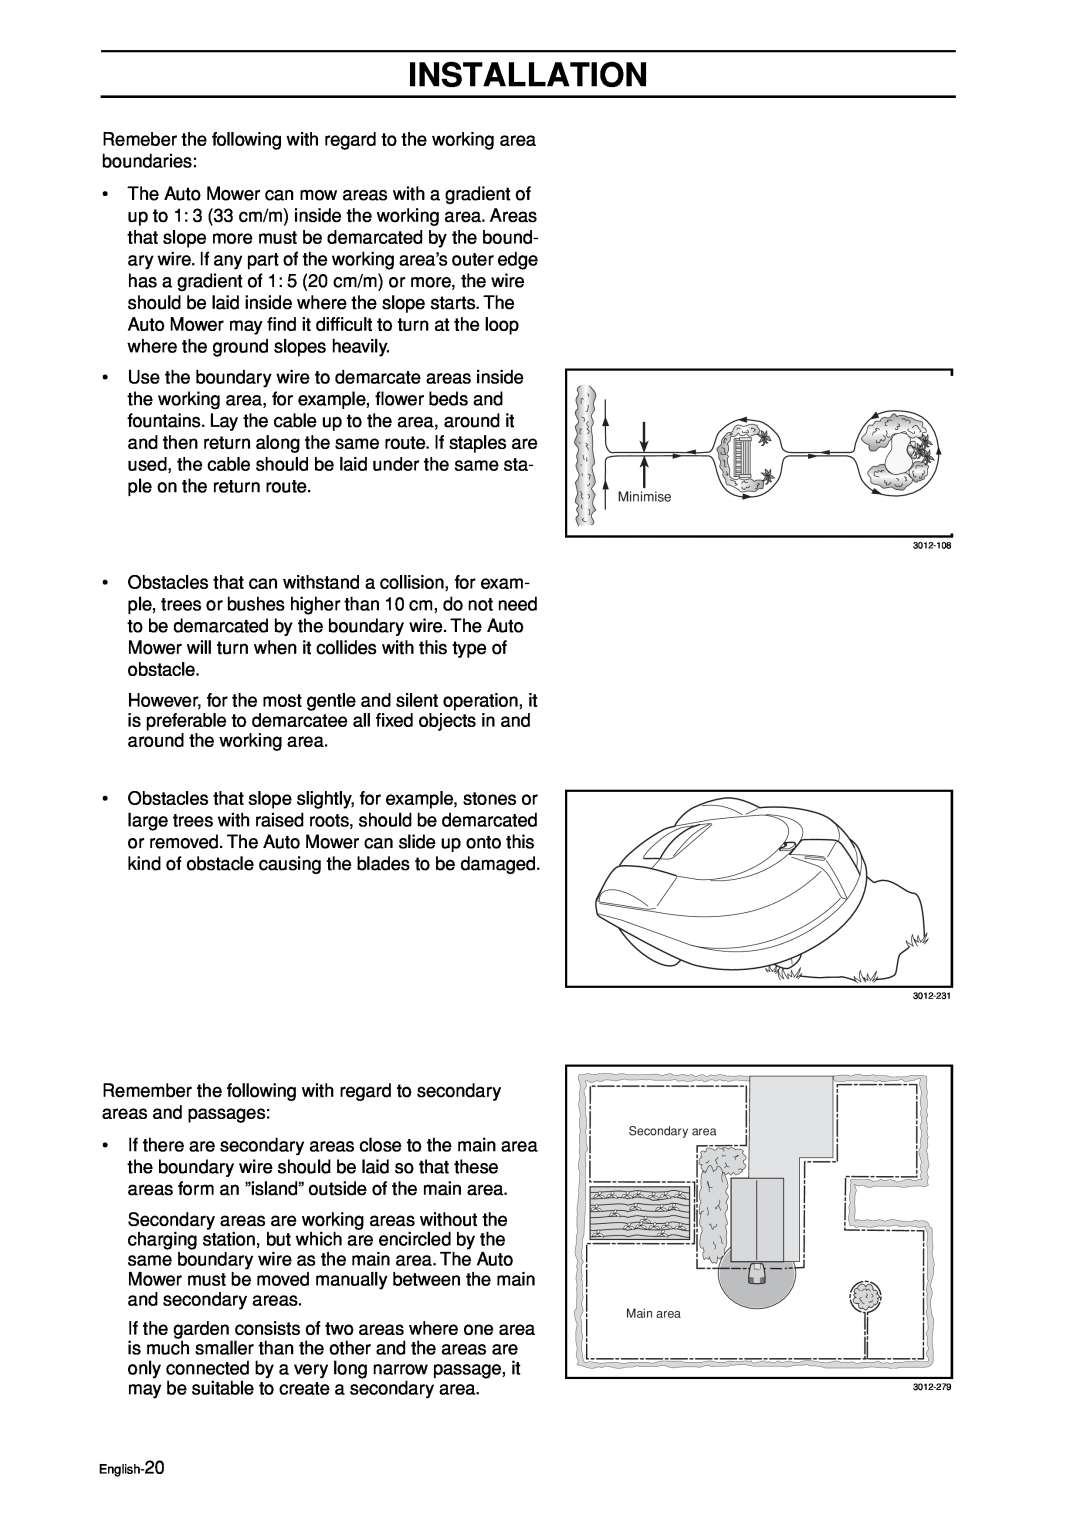 Husqvarna Auto Mower manual Installation, Remeber the following with regard to the working area boundaries 